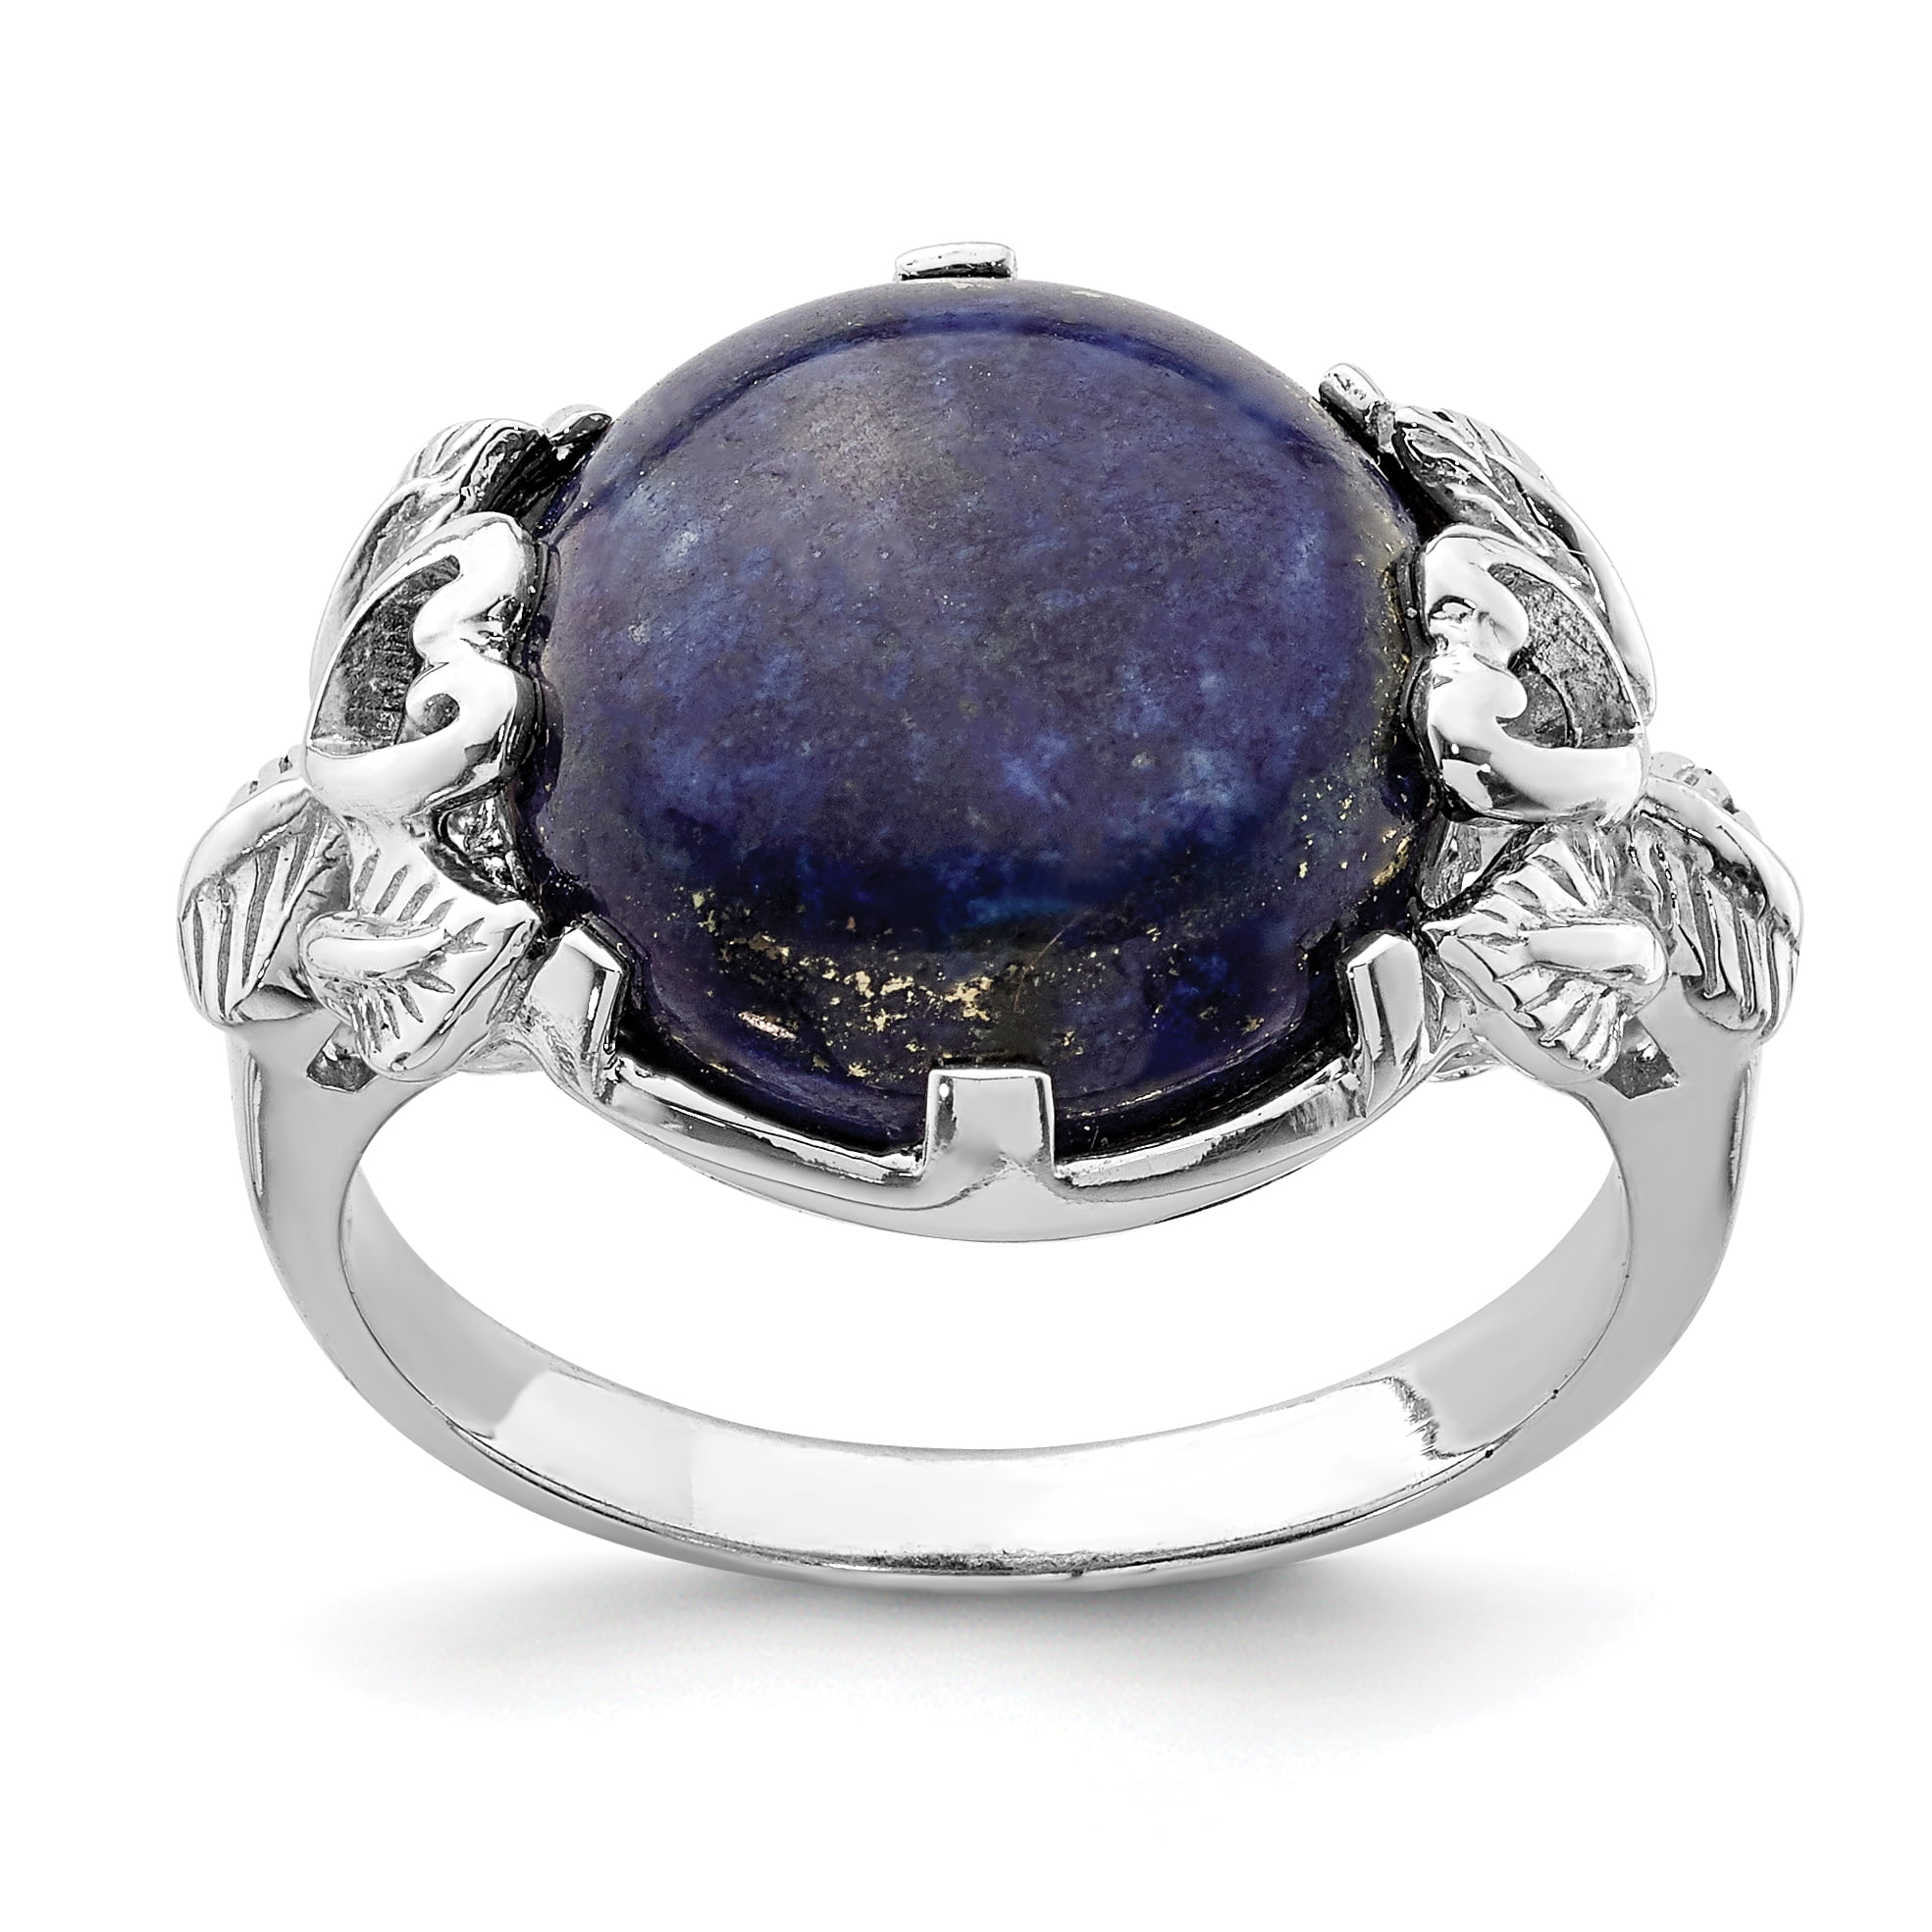 TJC Solitaire Ring for Women in Lapis Lazuli Jewellery